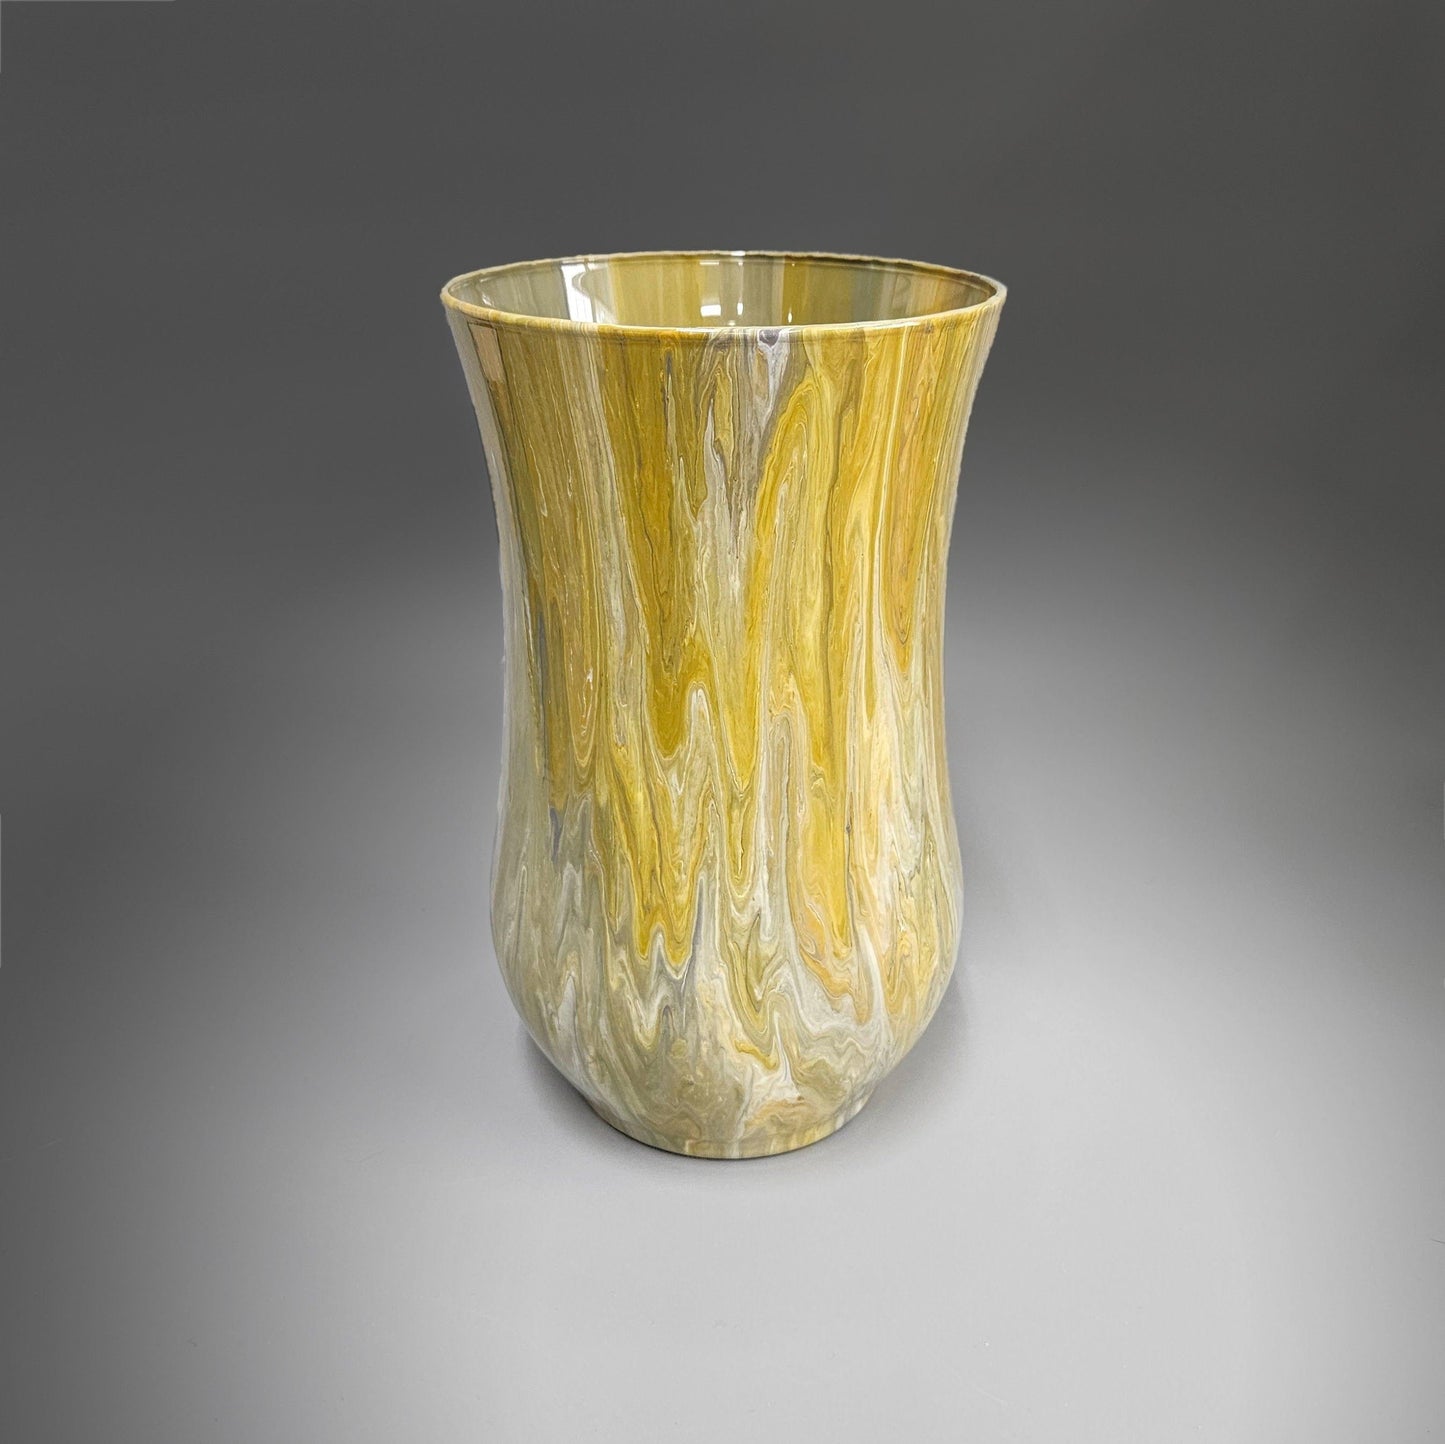 Glass Art Painted Hurricane Vase in Tan Gray and White